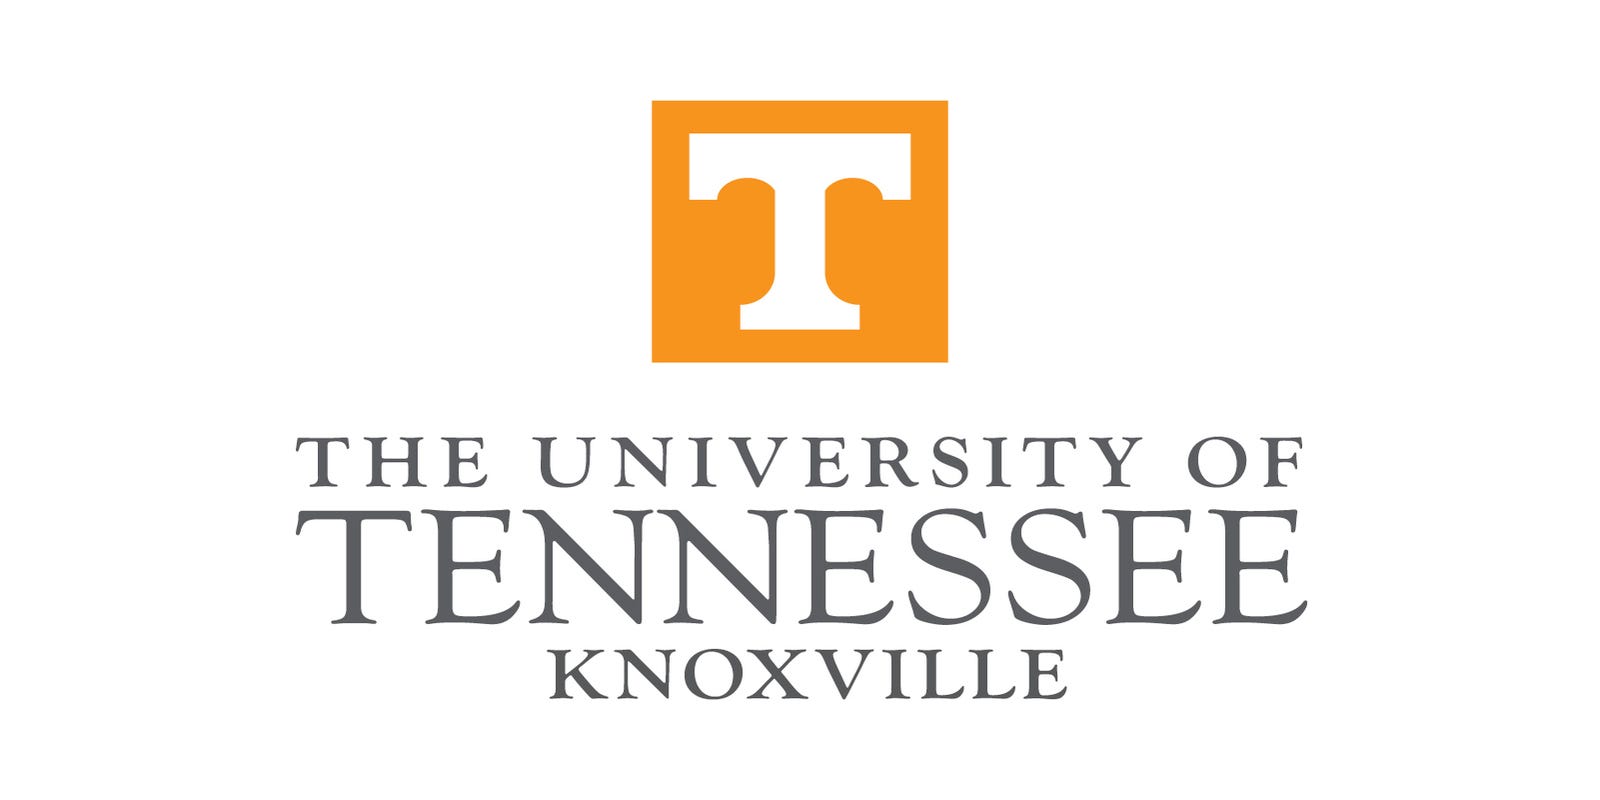 University of Tennessee disbands Office of Diversity